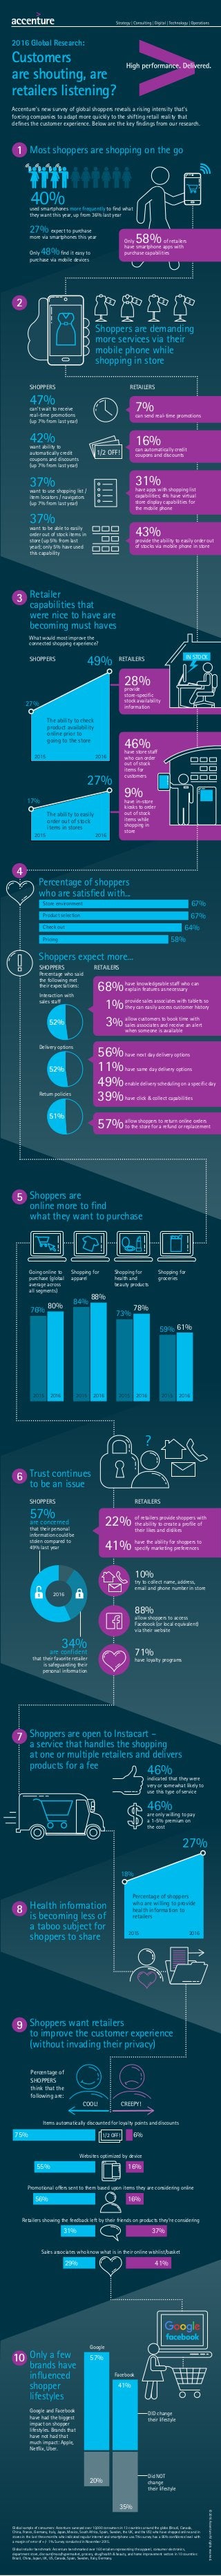 Accenture’s new survey of global shoppers reveals a rising intensity that’s
forcing companies to adapt more quickly to the shifting retail reality that
deﬁnes the customer experience. Below are the key ﬁndings from our research.
2016 Global Research:
Customers
are shouting, are
retailers listening?
Global sample of consumers: Accenture surveyed over 10,000 consumers in 13 countries around the globe (Brazil, Canada,
China, France, Germany, Italy, Japan, Mexico, South Africa, Spain, Sweden, the UK, and the US) who have shopped online and in
stores in the last three months who indicated regular internet and smartphone use. This survey has a 95% conﬁdence level with
a margin of error of +/- 1%. Survey conducted in November 2015.
Global retailer benchmark: Accenture benchmarked over 160 retailers representing the apparel, consumer electronics,
department store, discount/mass/hypermarket, grocery, drug/health & beauty, and home improvement sectors in 10 countries:
Brazil, China, Japan, UK, US, Canada, Spain, Sweden, Italy, Germany.
2
Shoppers are demanding
more services via their
mobile phone while
shopping in store
1
used smartphones more frequently to ﬁnd what
they want this year, up from 36% last year
27% expect to purchase
more via smartphones this year
Only 48%ﬁnd it easy to
purchase via mobile devices
Most shoppers are shopping on the go
Only 58% of retailers
have smartphone apps with
purchase capabilities
40%
5 Shoppers are
online more to ﬁnd
what they want to purchase
Going online to
purchase (global
average across
all segments)
Shopping for
apparel
Shopping for
health and
beauty products
Shopping for
groceries
20162015 20162015 20162015 20162015
76%
80%
84%
88%
73%
78%
59% 61%
Shoppers are open to Instacart –
a service that handles the shopping
at one or multiple retailers and delivers
products for a fee
7
46%
46%
indicated that they were
very or somewhat likely to
use this type of service
are only willing to pay
a 1-5% premium on
the cost
8 Health information
is becoming less of
a taboo subject for
shoppers to share
27%
18%
20162015
Percentage of shoppers
who are willing to provide
health information to
retailers
Percentage of shoppers
who are satisﬁed with...
Interaction with
sales staff
SHOPPERS
Percentage who said
the following met
their expectations:
Delivery options
Return policies
Shoppers expect more...
have knowledgeable staff who can
explain features as necessary
provide sales associates with tablets so
they can easily access customer history
allow customers to book time with
sales associates and receive an alert
when someone is available
have next day delivery options
have same day delivery options
enable delivery scheduling on a speciﬁc day
have click & collect capabilities
allow shoppers to return online orders
to the store for a refund or replacement
RETAILERS
67%
67%
64%
58%
Store environment
Product selection
Check out
Pricing
4
©2016AccentureAllrightsreserved.
47%can’t wait to receive
real-time promotions
(up 7% from last year)
42%want ability to
automatically credit
coupons and discounts
(up 7% from last year)
37%want to use shopping list /
item locators / navigators
(up 7% from last year)
37%want to be able to easily
order out of stock items in
store (up 5% from last
year); only 5% have used
this capability
7%can send real-time promotions
16%can automatically credit
coupons and discounts
31%have apps with shopping list
capabilities; 4% have virtual
store display capabilities for
the mobile phone
43%provide the ability to easily order out
of stocks via mobile phone in store
SHOPPERS RETAILERS
1/2 OFF!
3 Retailer
capabilities that
were nice to have are
becoming must haves
49%
28%provide
store-speciﬁc
stock availability
information
SHOPPERS RETAILERS
The ability to check
product availability
online prior to
going to the store
27%
20162015
17%
46%have store staff
who can order
out of stock
items for
customers
9%have in-store
kiosks to order
out of stock
items while
shopping in
store
20162015
The ability to easily
order out of stock
items in stores
27%
IN STOCK
6 Trust continues
to be an issue
SHOPPERS RETAILERS
57%are concerned
that their personal
information could be
stolen compared to
49% last year
34%are conﬁdent
that their favorite retailer
is safeguarding their
personal information
2016
of retailers provide shoppers with
the ability to create a proﬁle of
their likes and dislikes
have the ability for shoppers to
specify marketing preferences
10%
try to collect name, address,
email and phone number in store
88%
allow shoppers to access
Facebook (or local equivalent)
via their website
71%
have loyalty programs
?
68%
56%
11%
49%
39%
57%
1%
3%
41%
22%
What would most improve the
connected shopping experience?
$ $$ $
52%
52%
51%
Items automatically discounted for loyalty points and discounts
Websites optimized by device
Promotional offers sent to them based upon items they are considering online
Sales associates who know what is in their online wishlist/basket
Retailers showing the feedback left by their friends on products they’re considering
9 Shoppers want retailers
to improve the customer experience
(without invading their privacy)
1/2 OFF!
Percentage of
SHOPPERS
think that the
following are:
COOL! CREEPY!
75% 6%
16%55%
16%56%
29% 41%
31% 37%
Google and Facebook
have had the biggest
impact on shopper
lifestyles. Brands that
have not had that
much impact: Apple,
Netﬂix, Uber.
10 Only a few
brands have
inﬂuenced
shopper
lifestyles
Did NOT
change
their lifestyle
DID change
their lifestyle
Google
Facebook
20%
35%
41%
57%
 